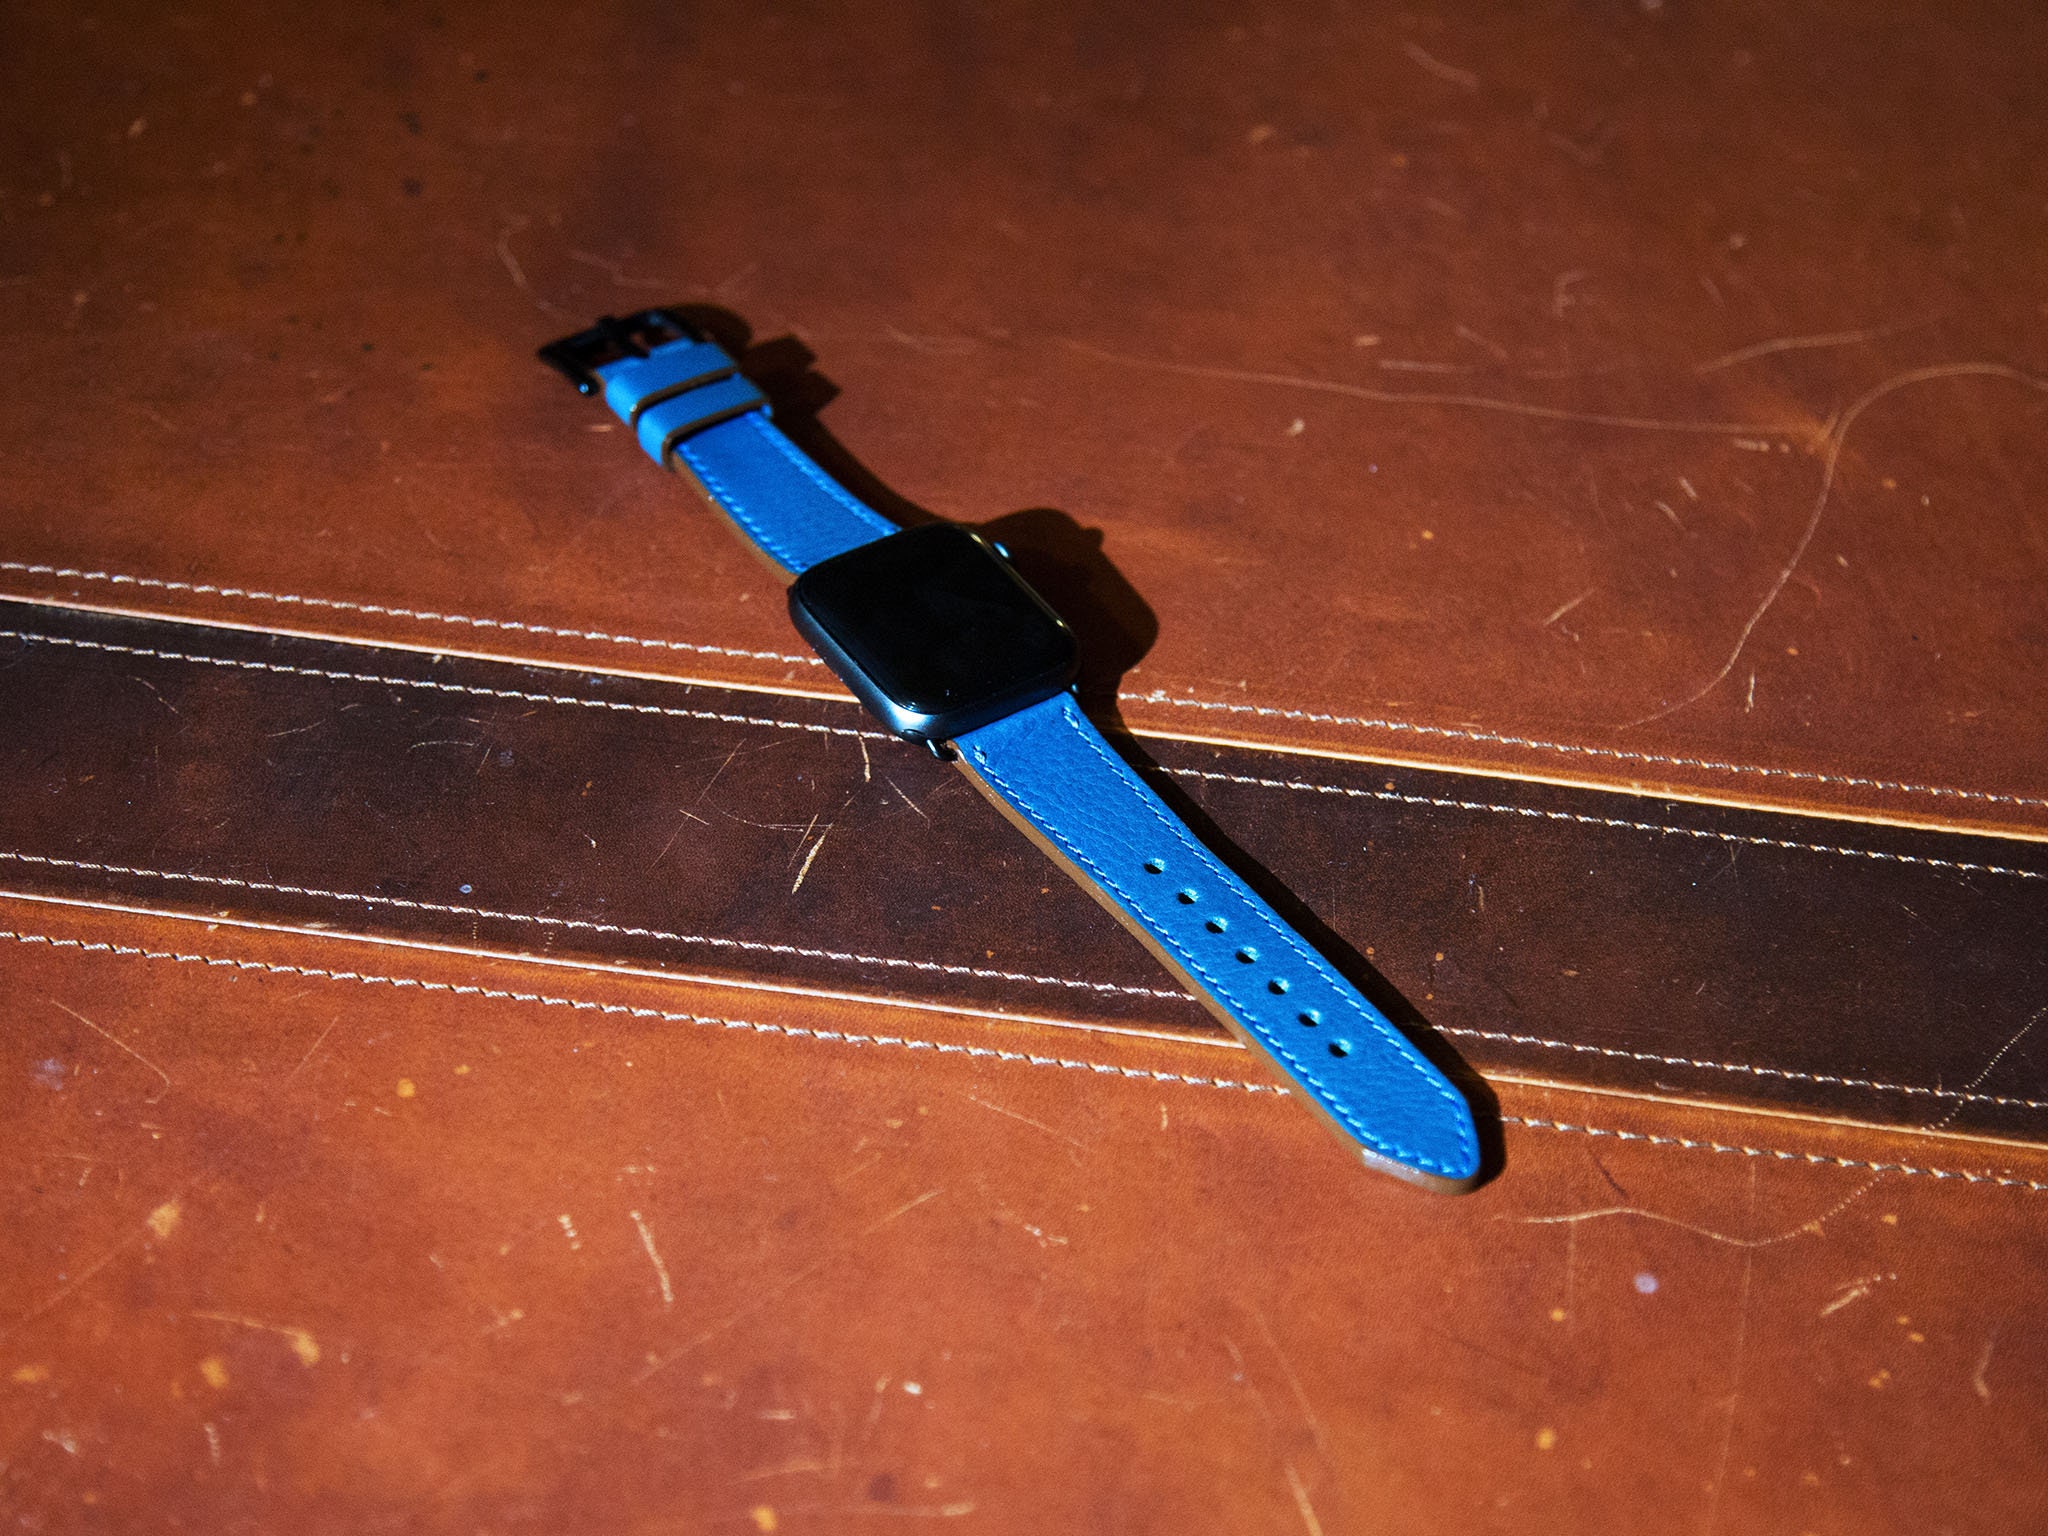 Apple Watch Leather Band ™ Light Blue Ostrich Leather Strap